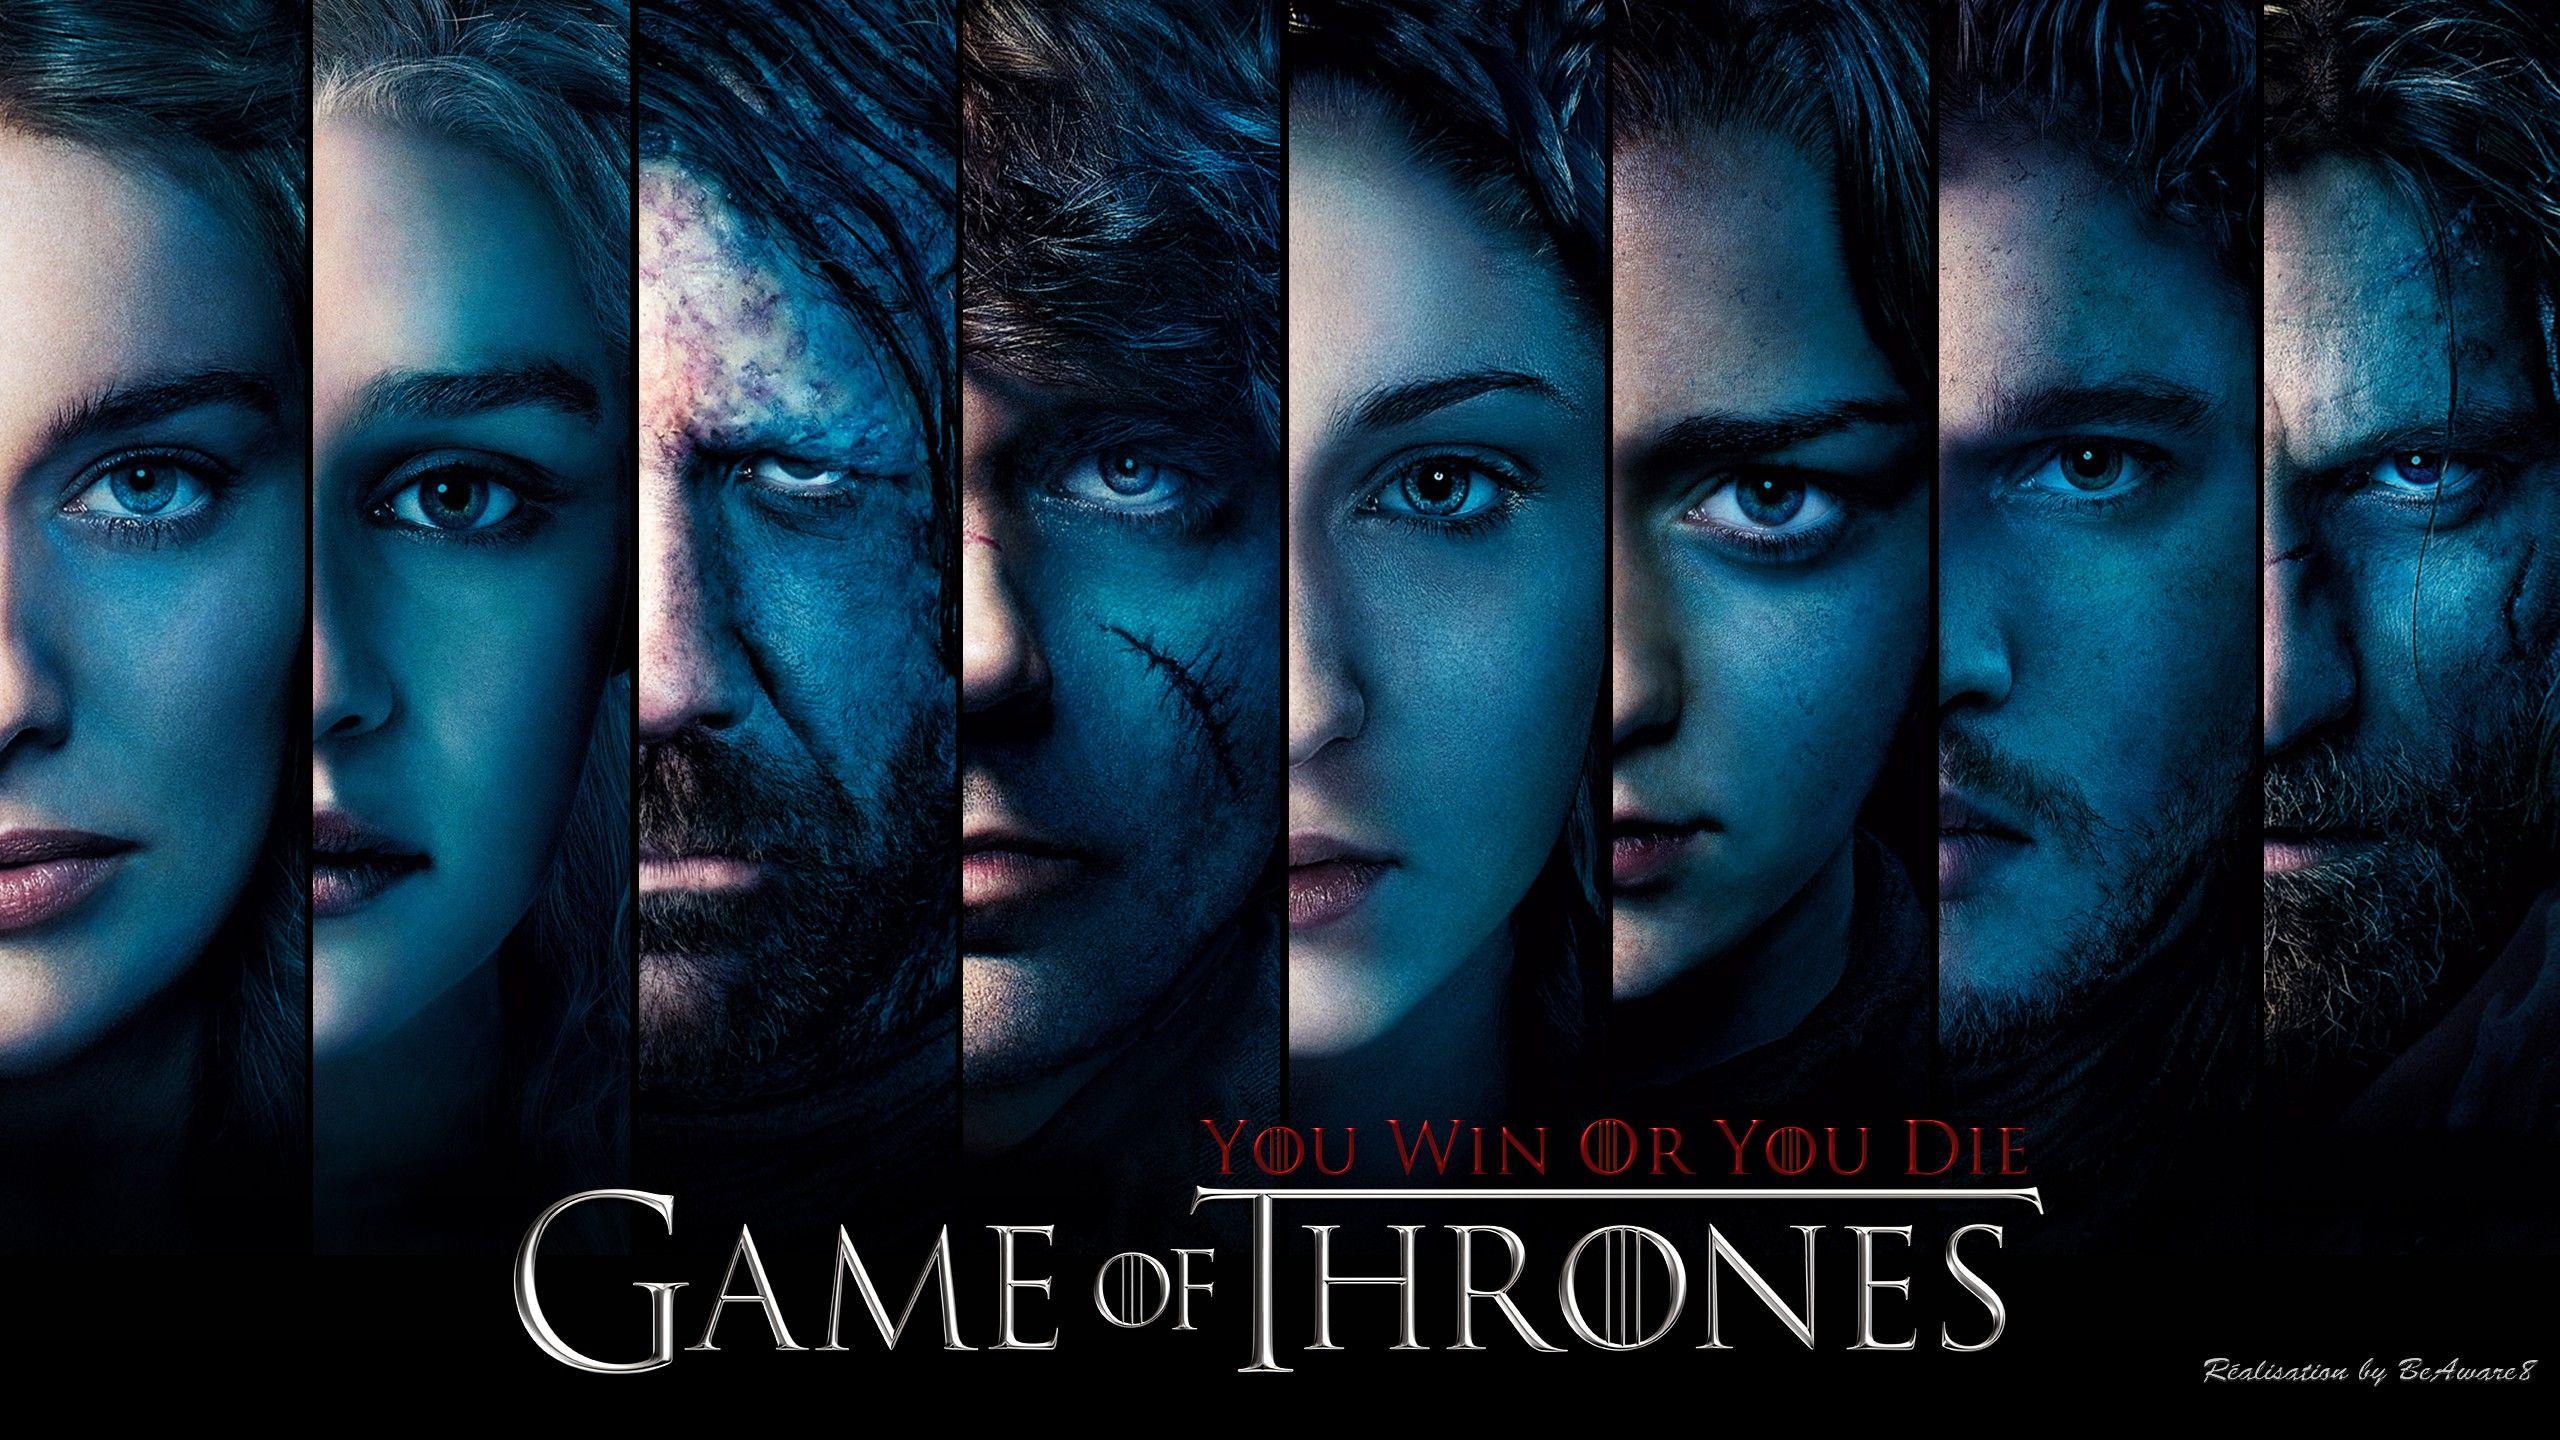 Game of Thrones wallpapers ·① Download free awesome full HD